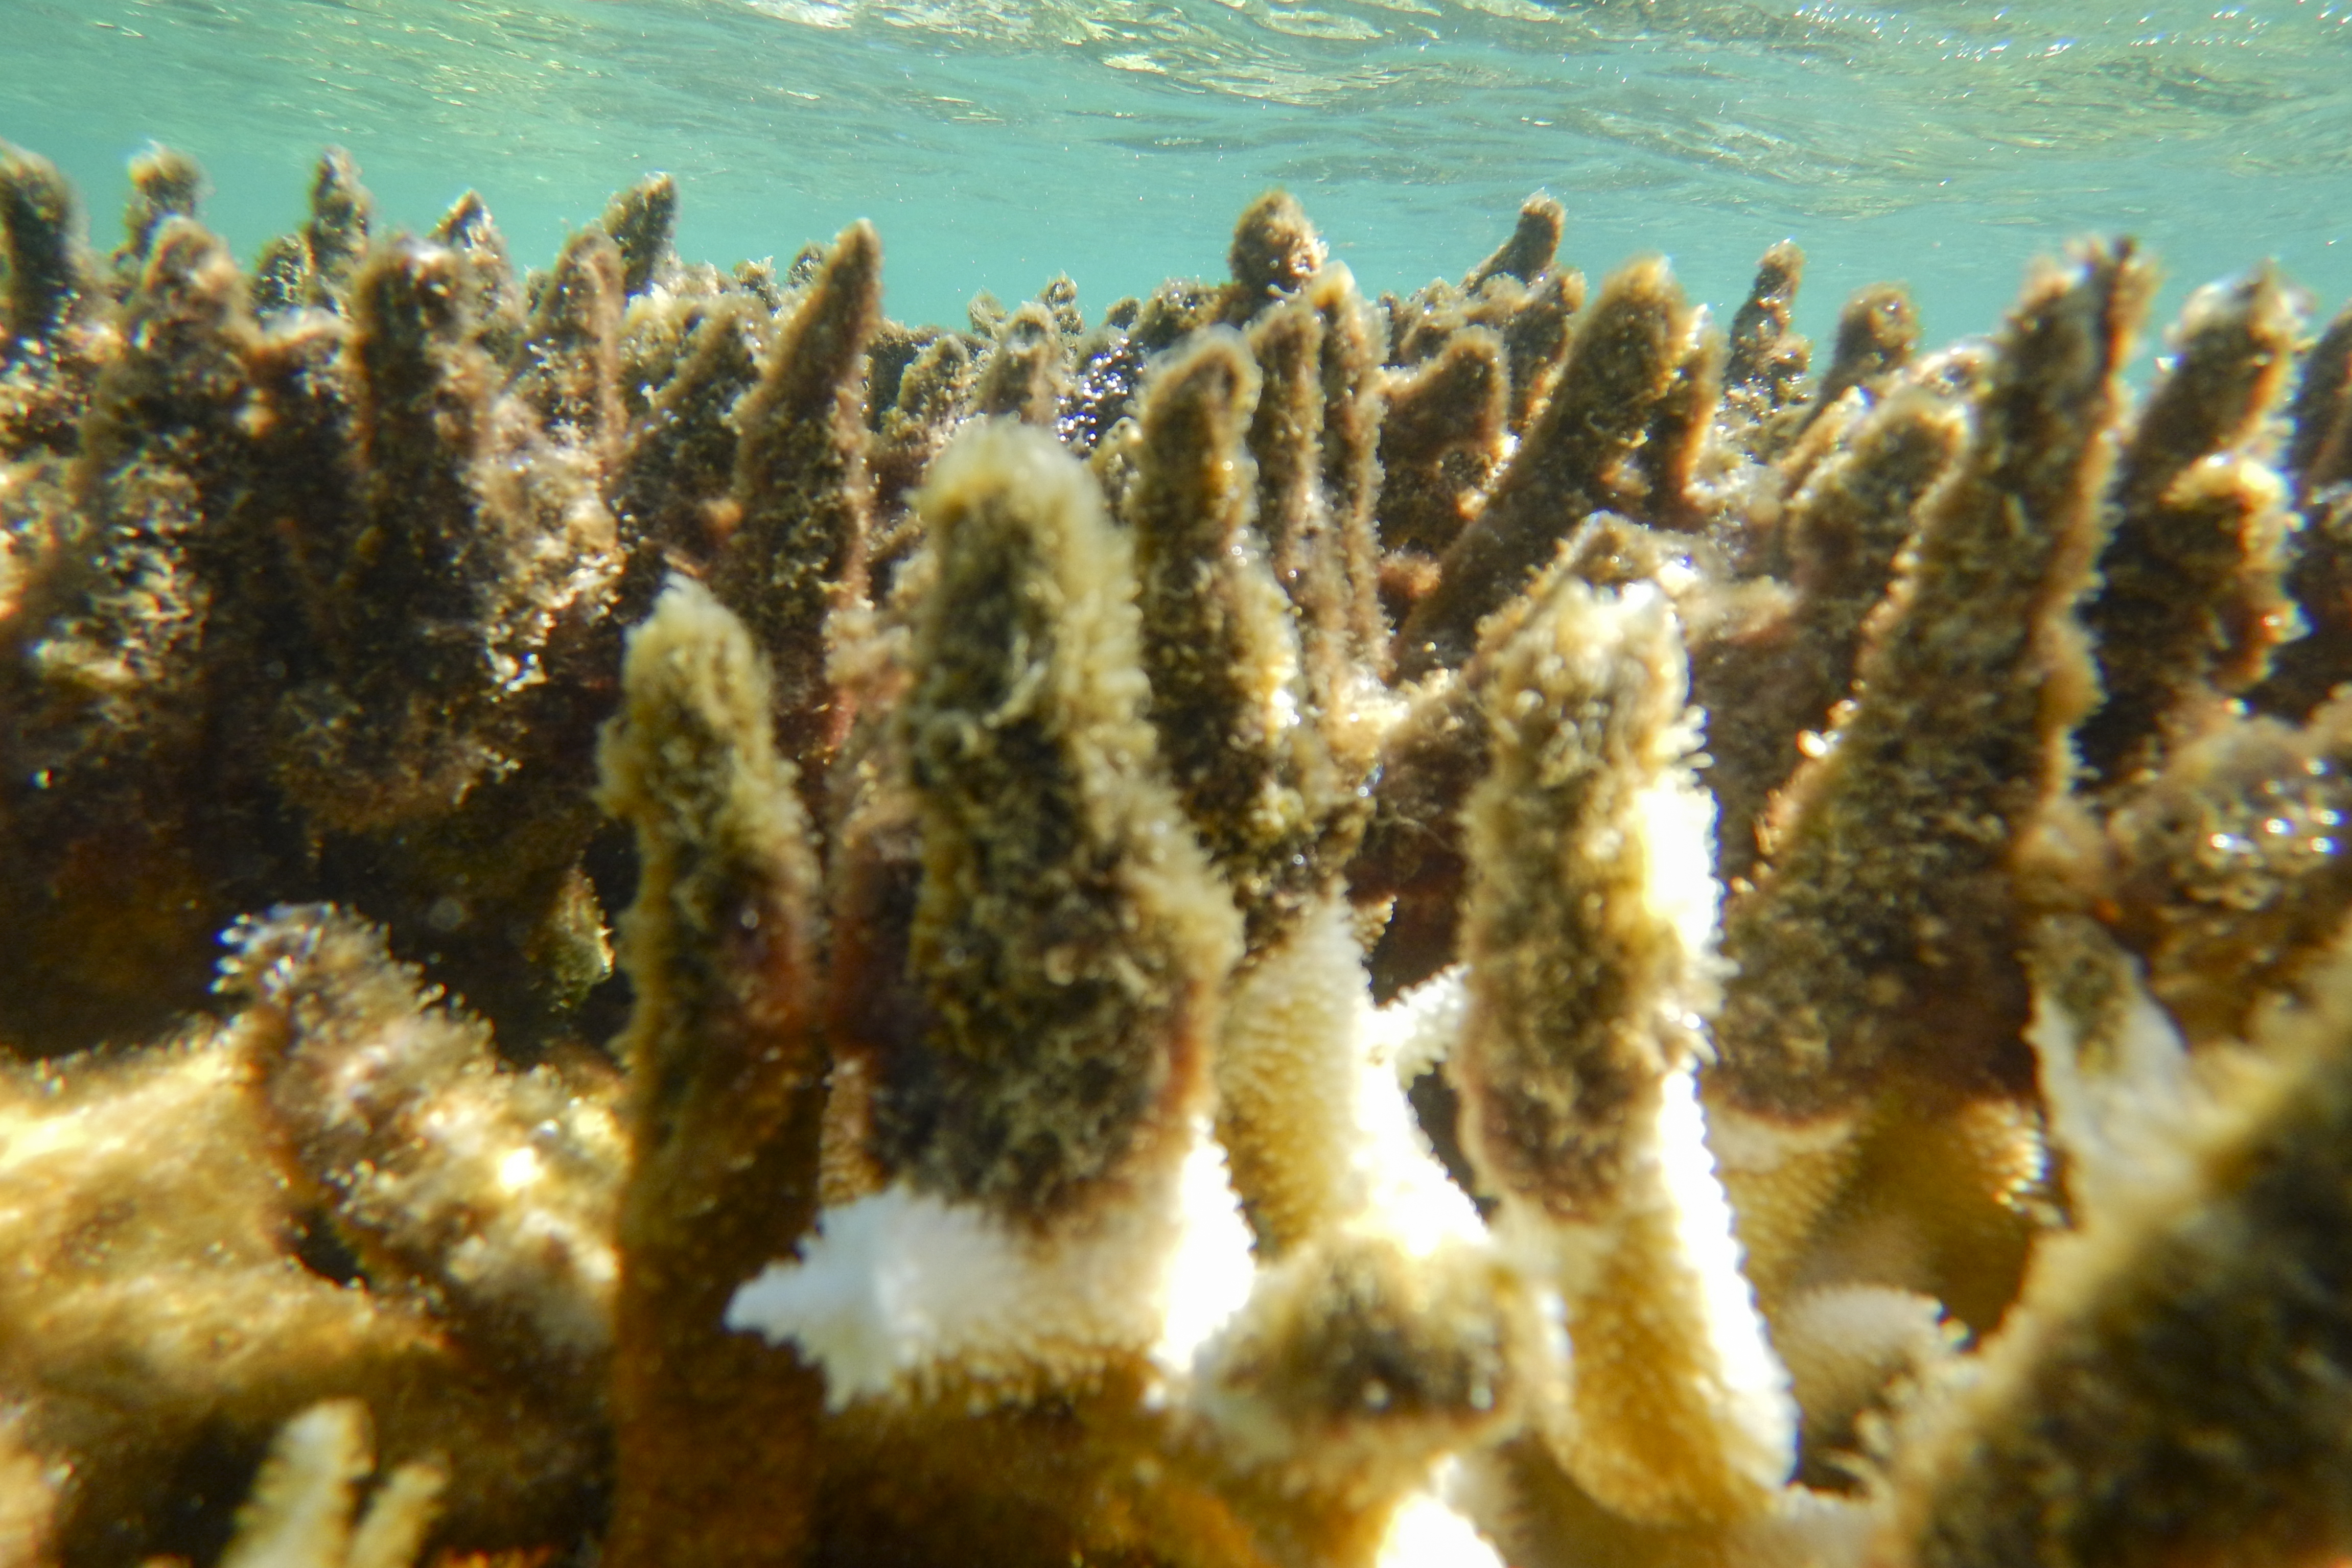 Diseased corals on a reef in Cairns/Cooktown on the Great Barrier Reef in Australia